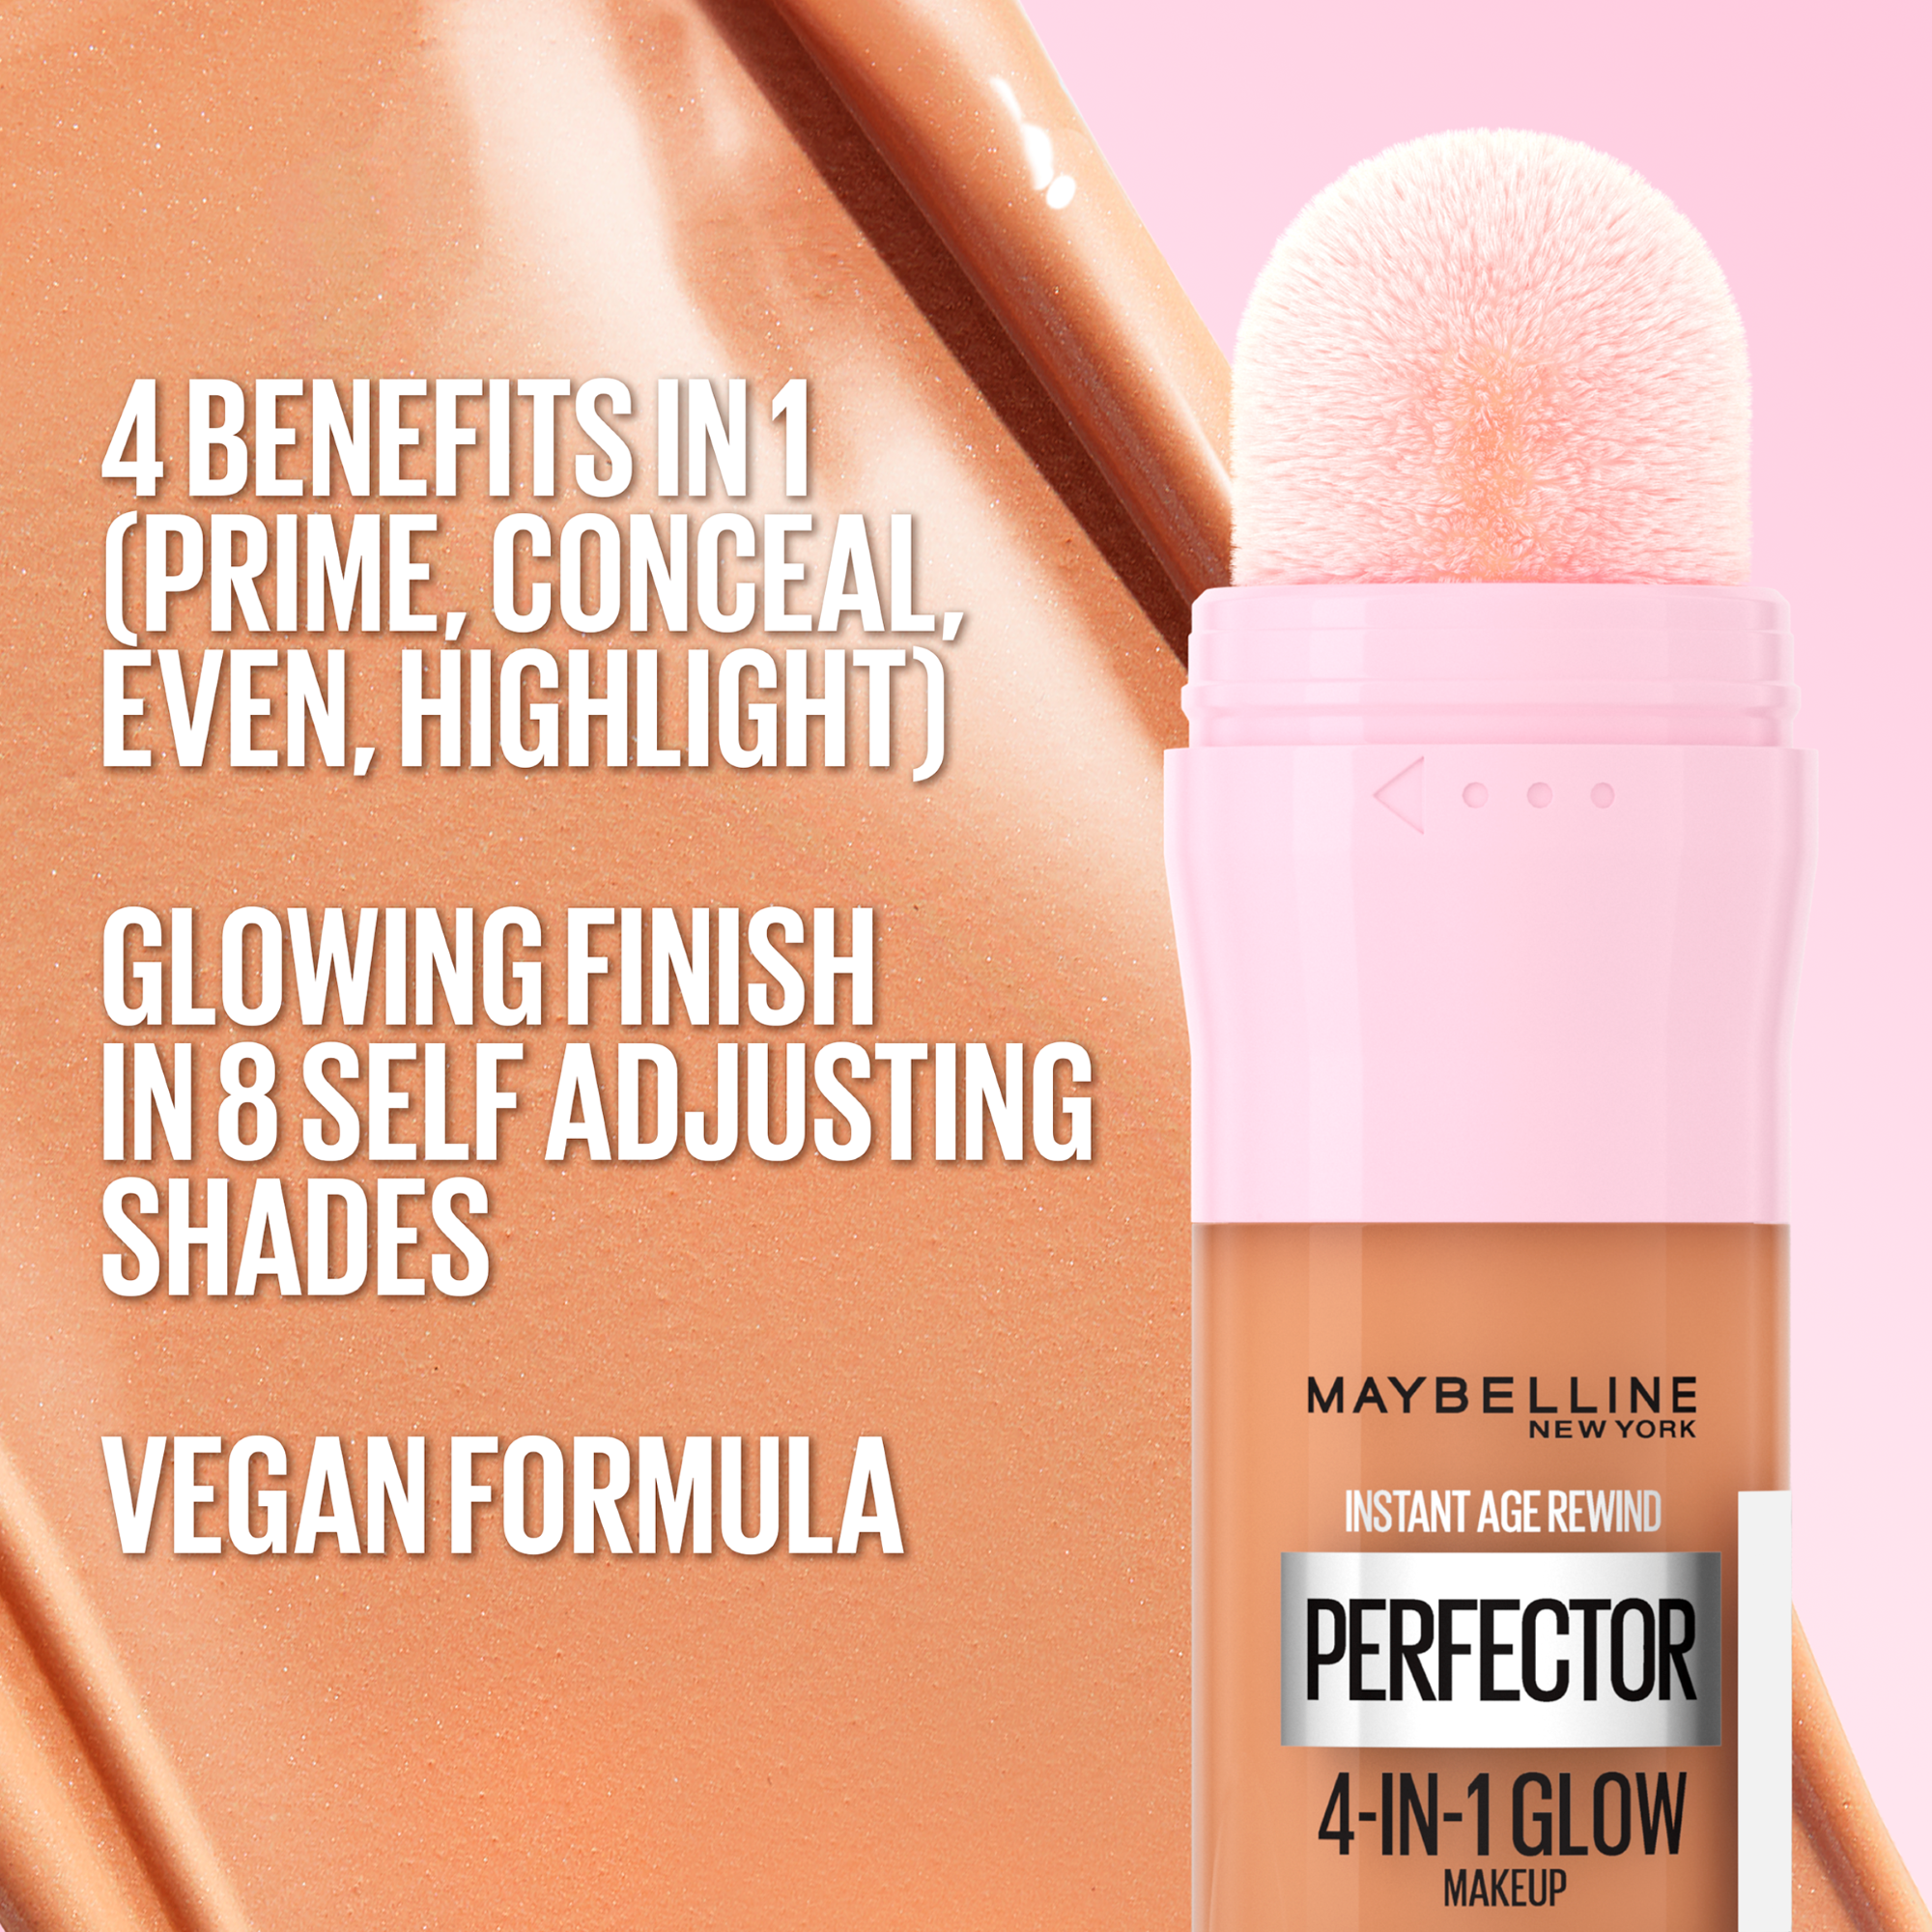 Maybelline Instant Age Rewind Perfector 4-In-1 Glow Makeup 20Ml